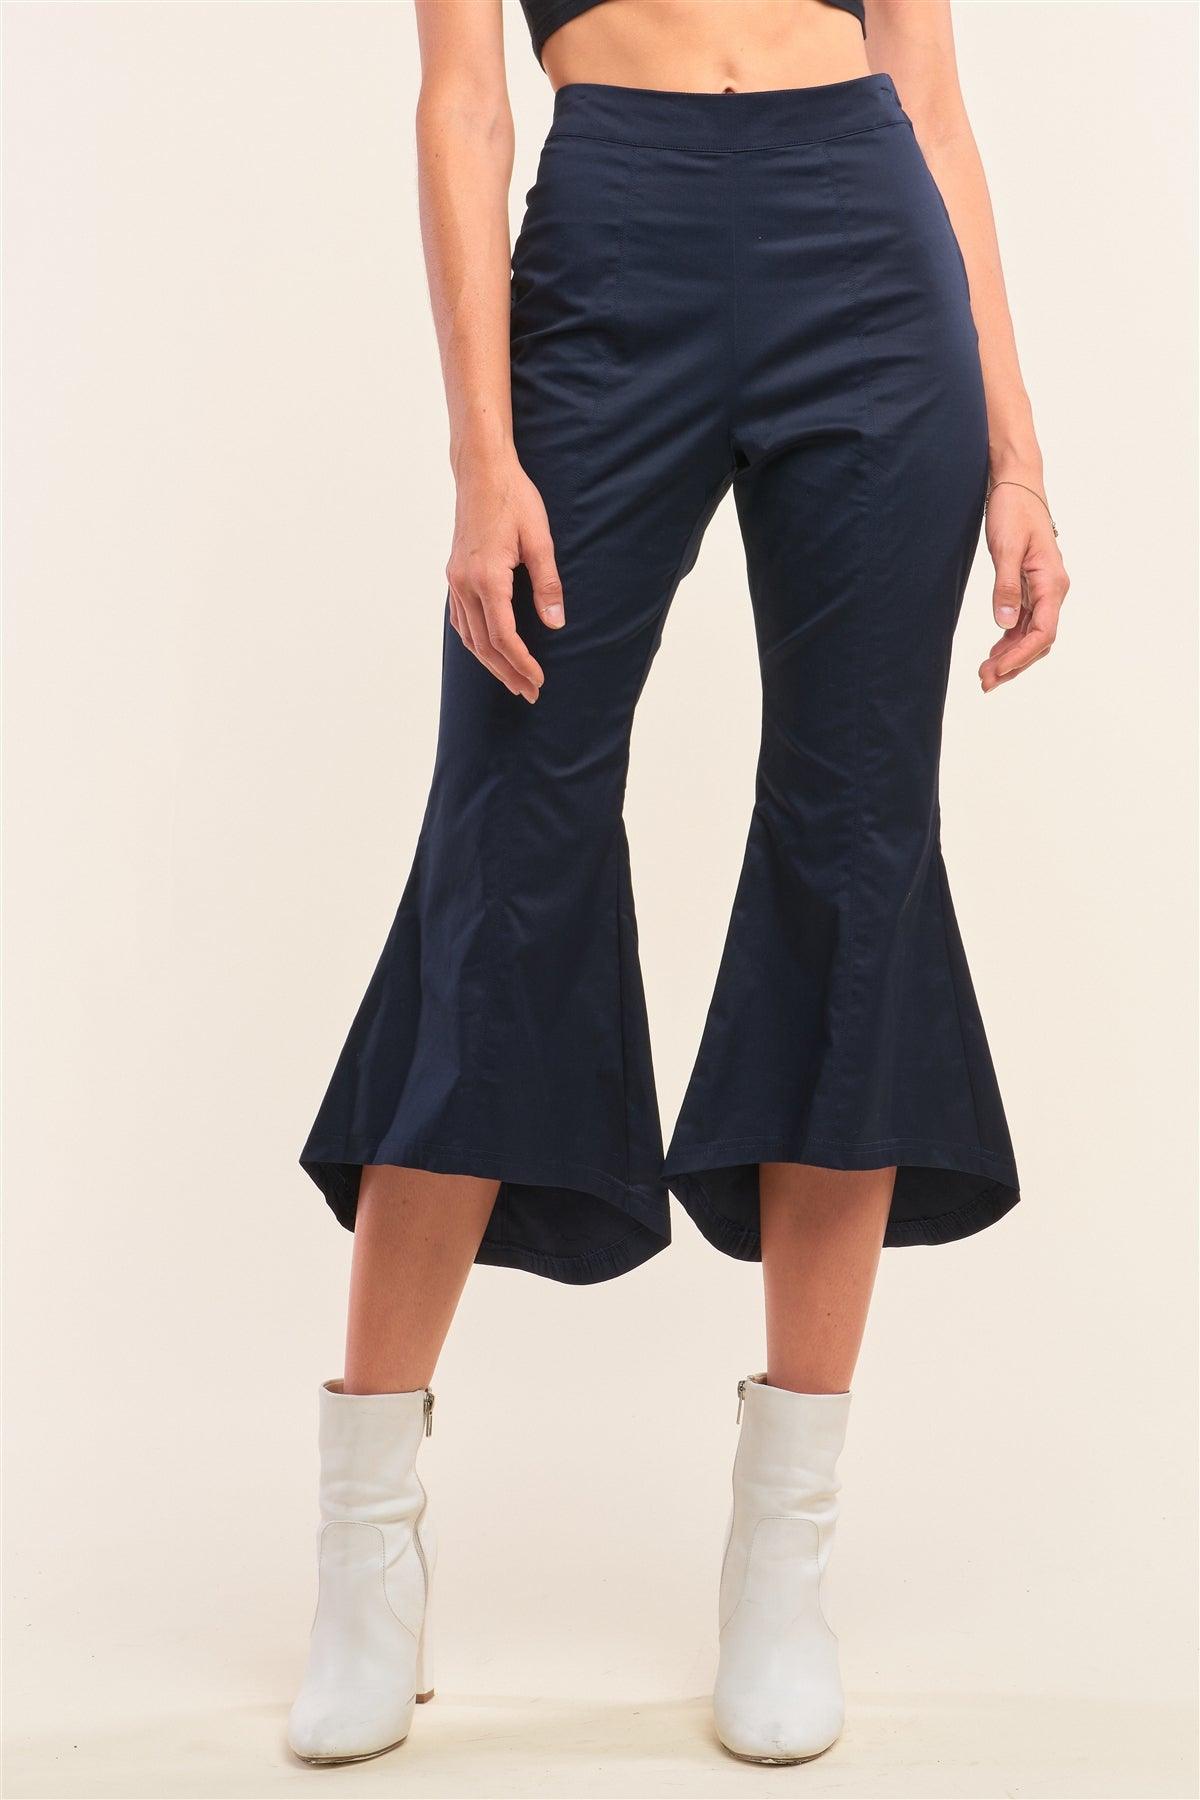 Navy Solid High Waisted Retro Flare Pants /2-2